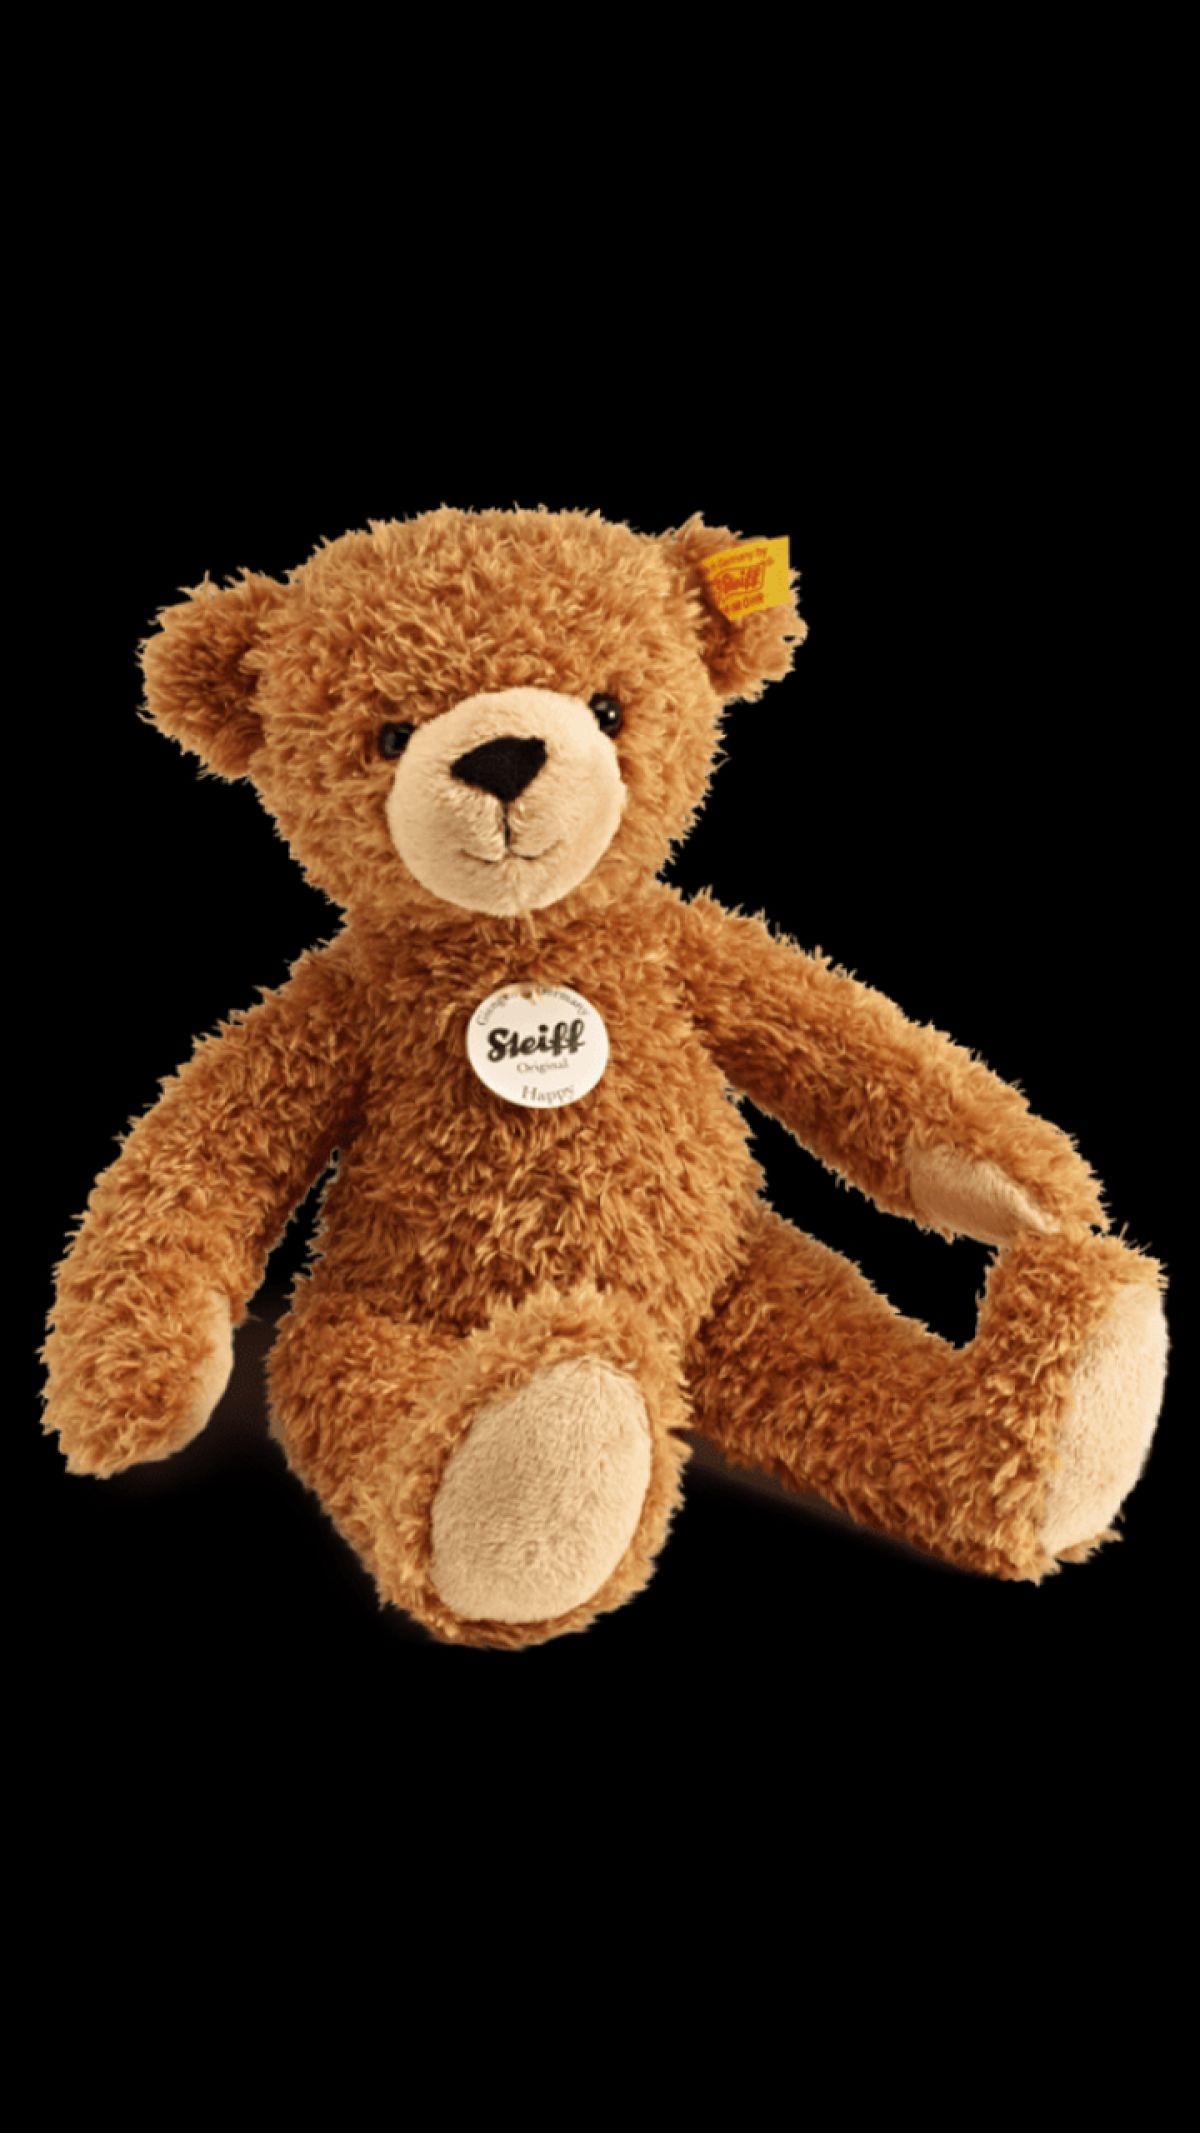 Top 10 Most Expensive Teddy Bears in the world